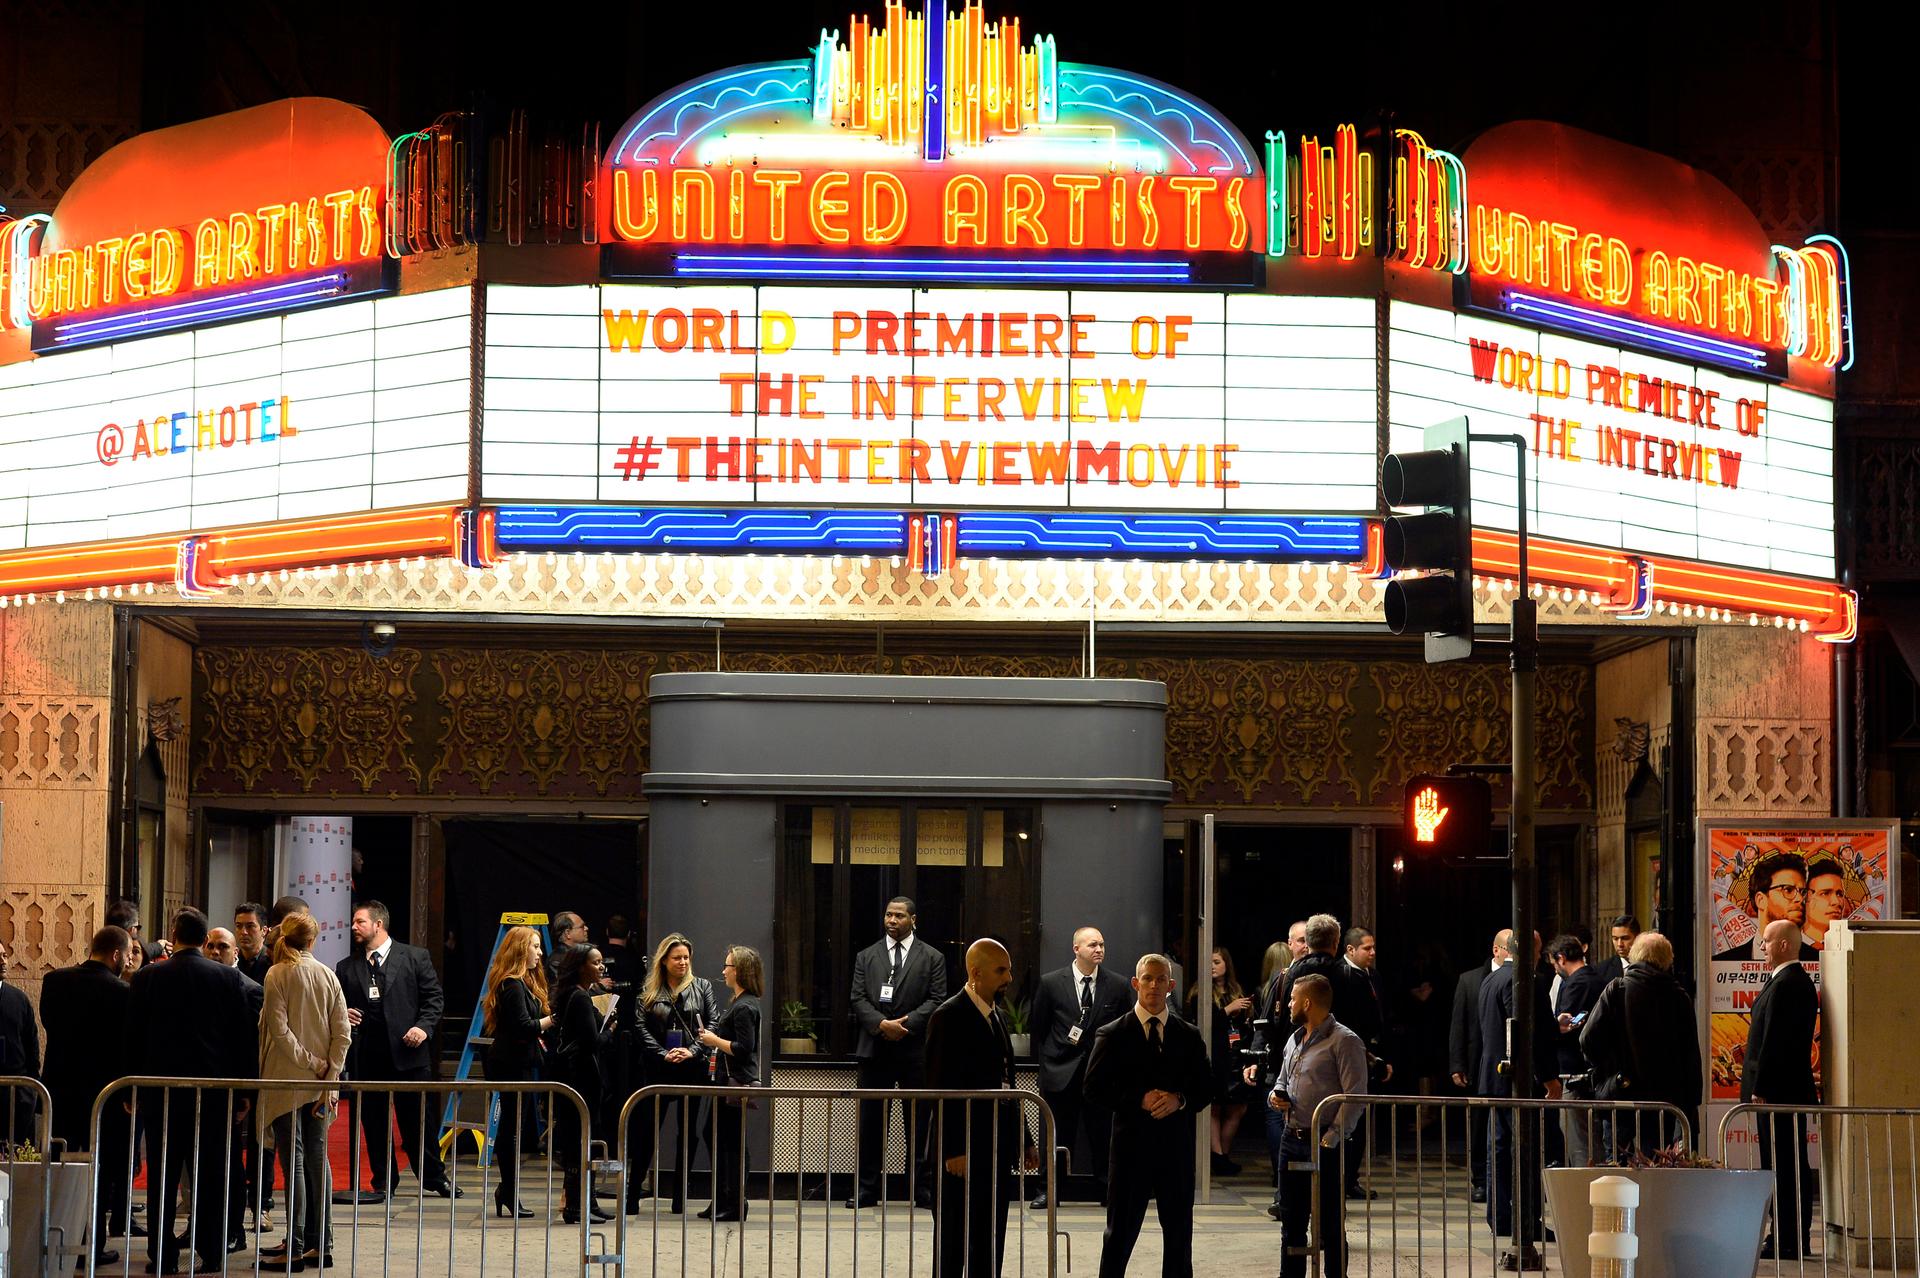 ​Security guards stand behind bicycle rails at the entrance of United Artists theater during premiere of the film "The Interview" in Los Angeles, California December 11, 2014.